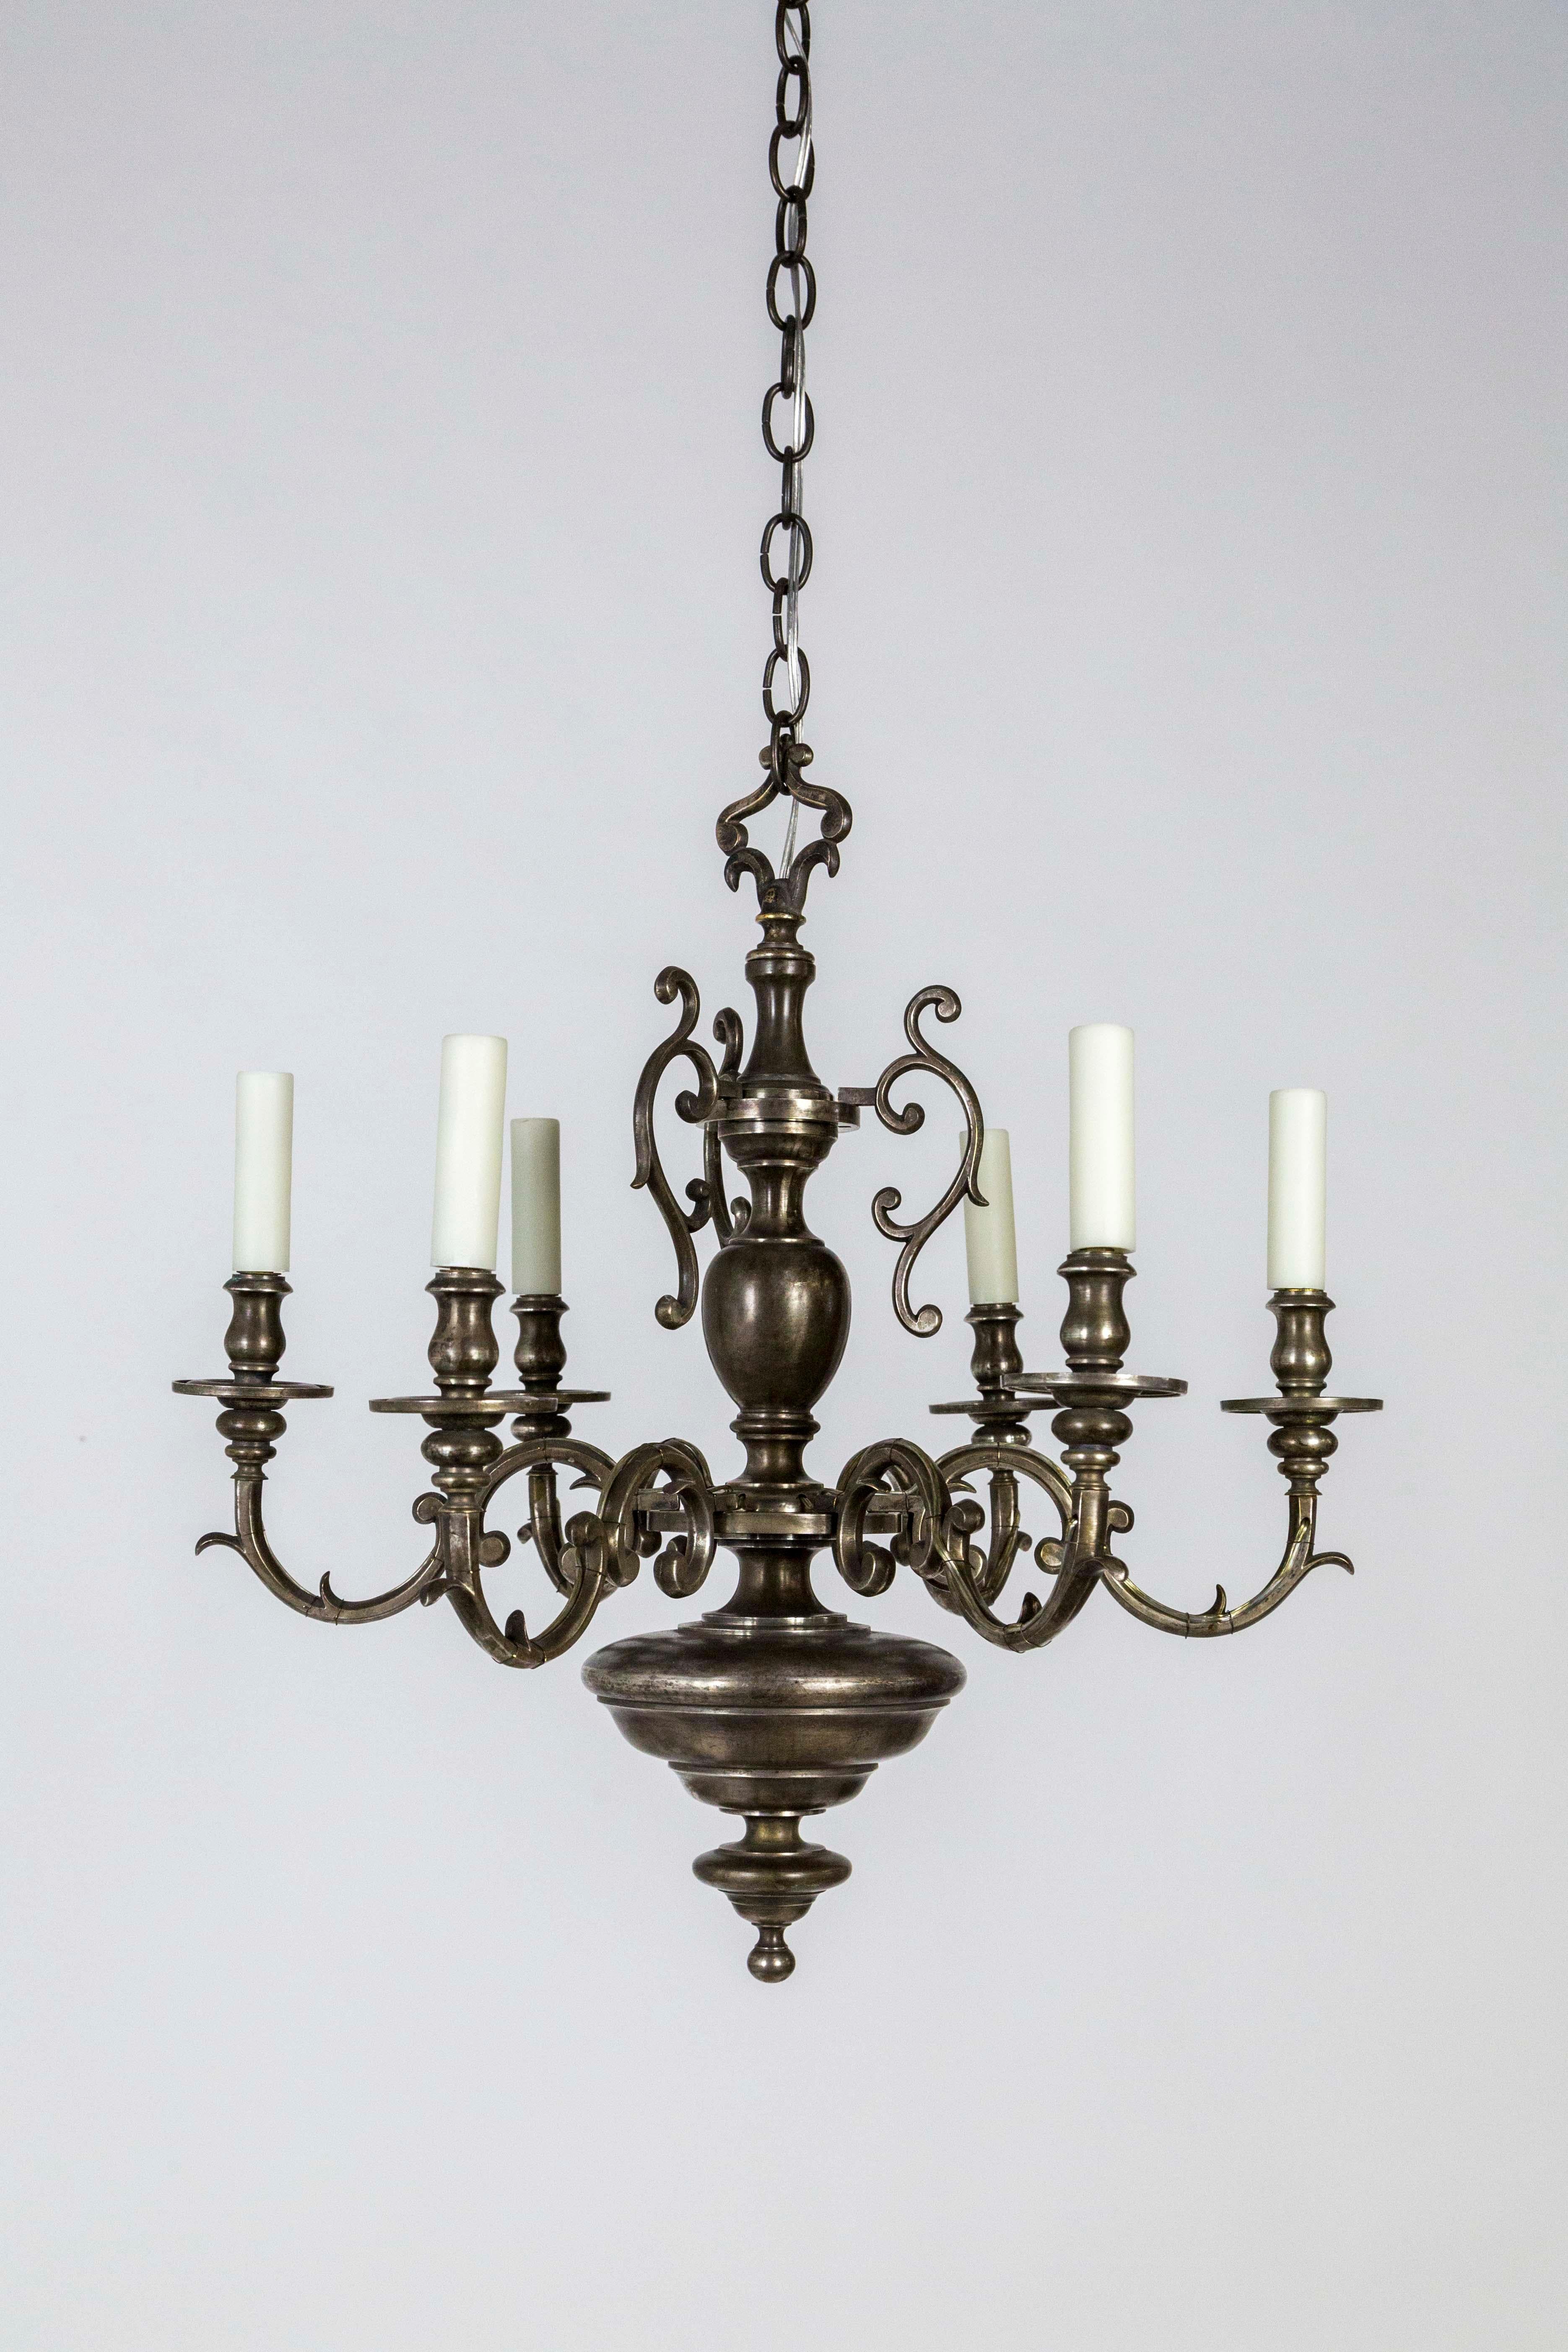 A Dutch, Baroque style, 6-arm chandelier created circa 1900, a beautifully crafted, solid bronze piece with an antique silver finish. Newly wired. Measures: 24.5” height x 25.5